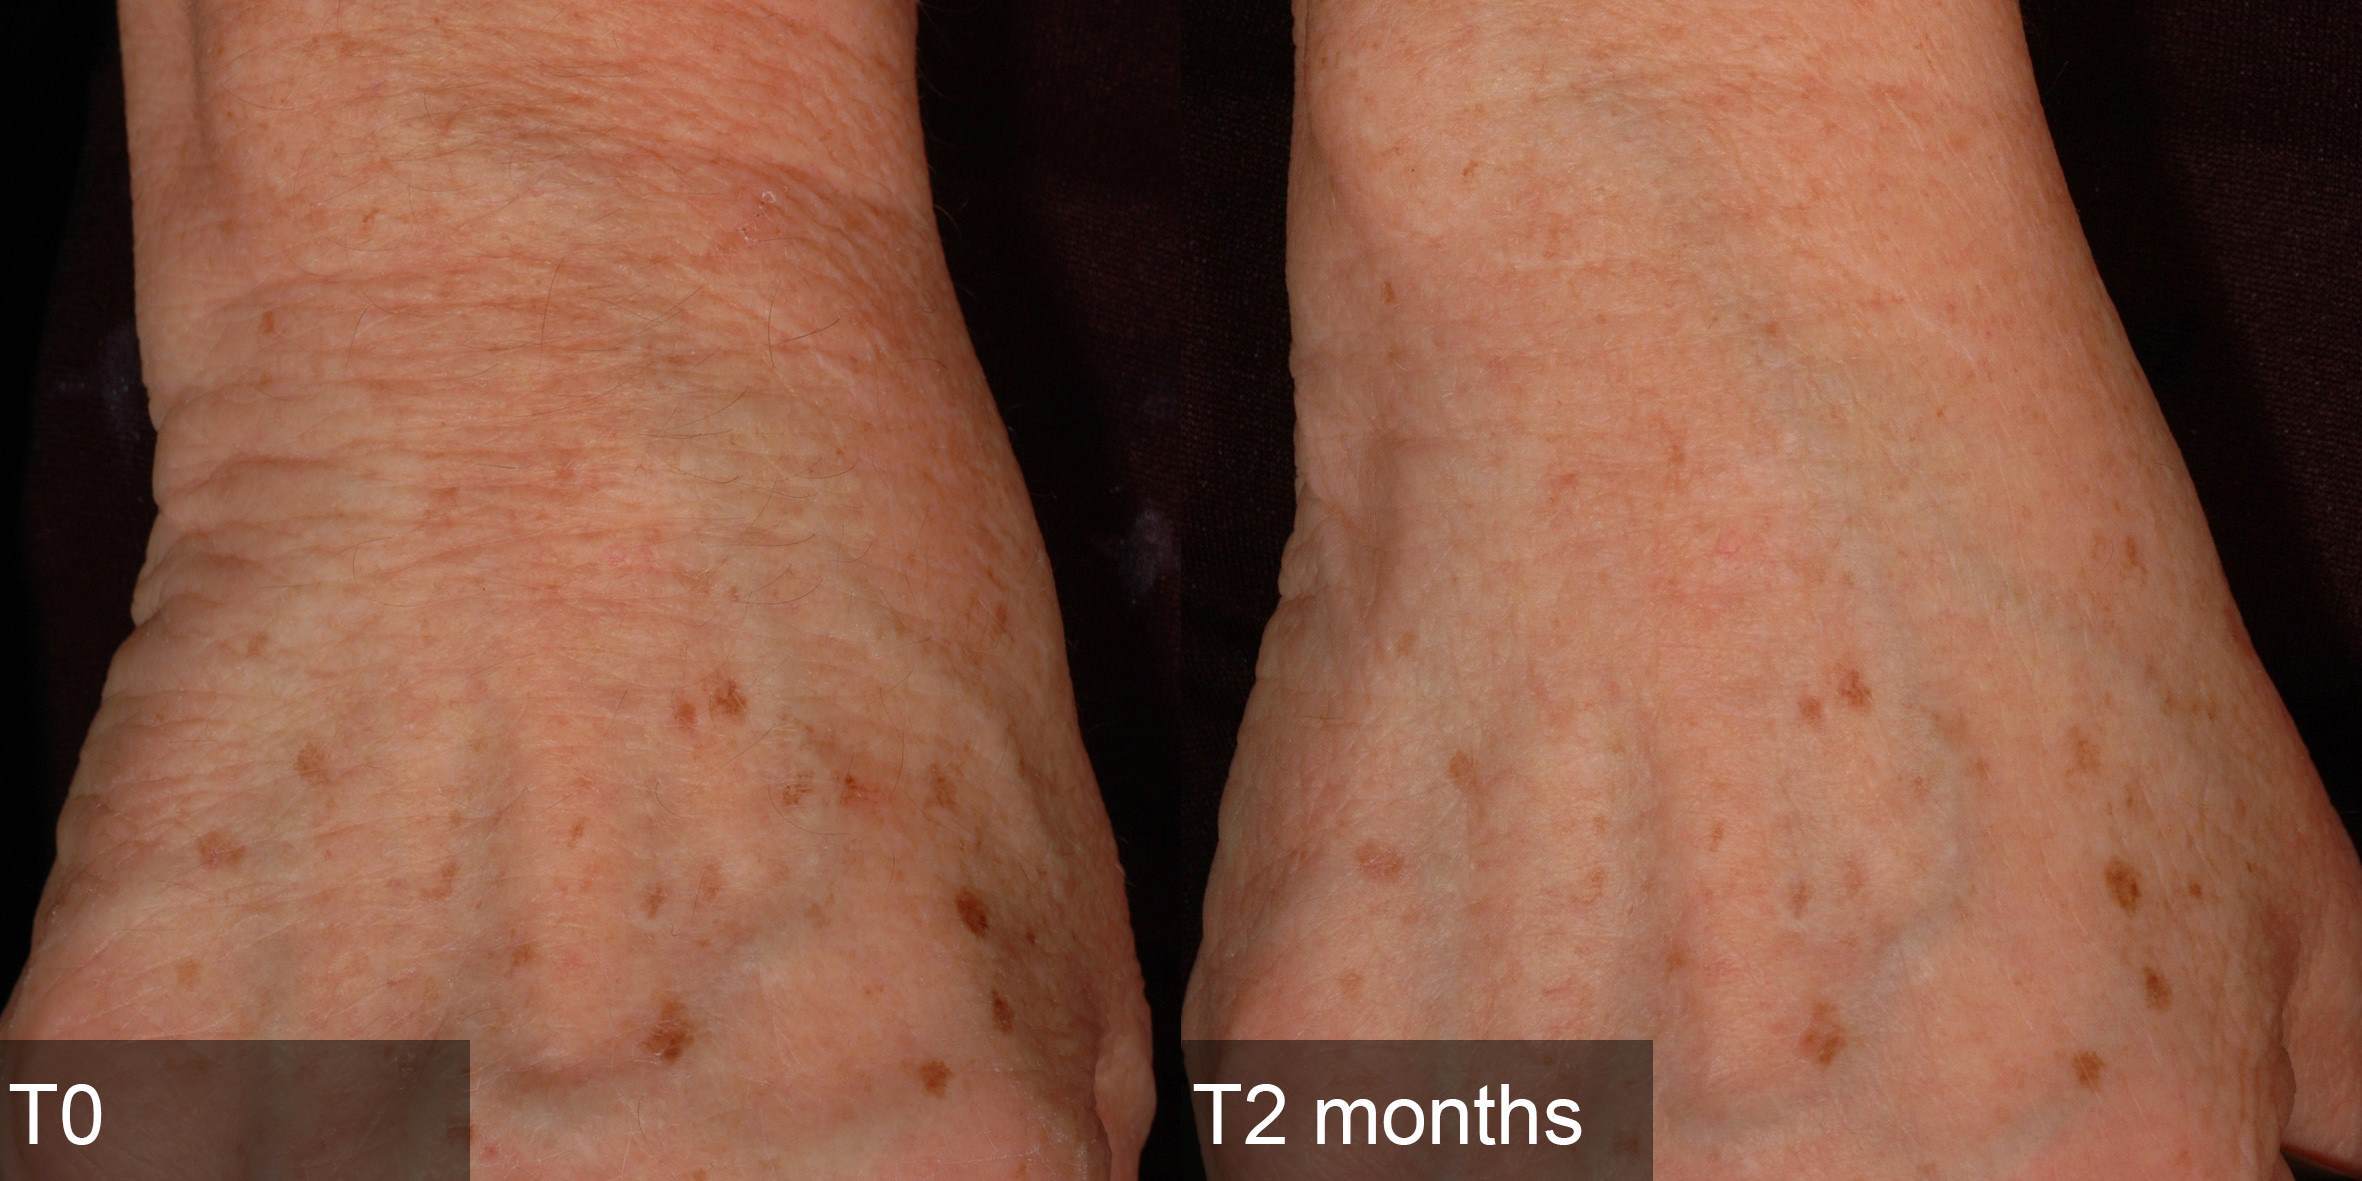 Comparison between T0 and T2 months after using Senestem